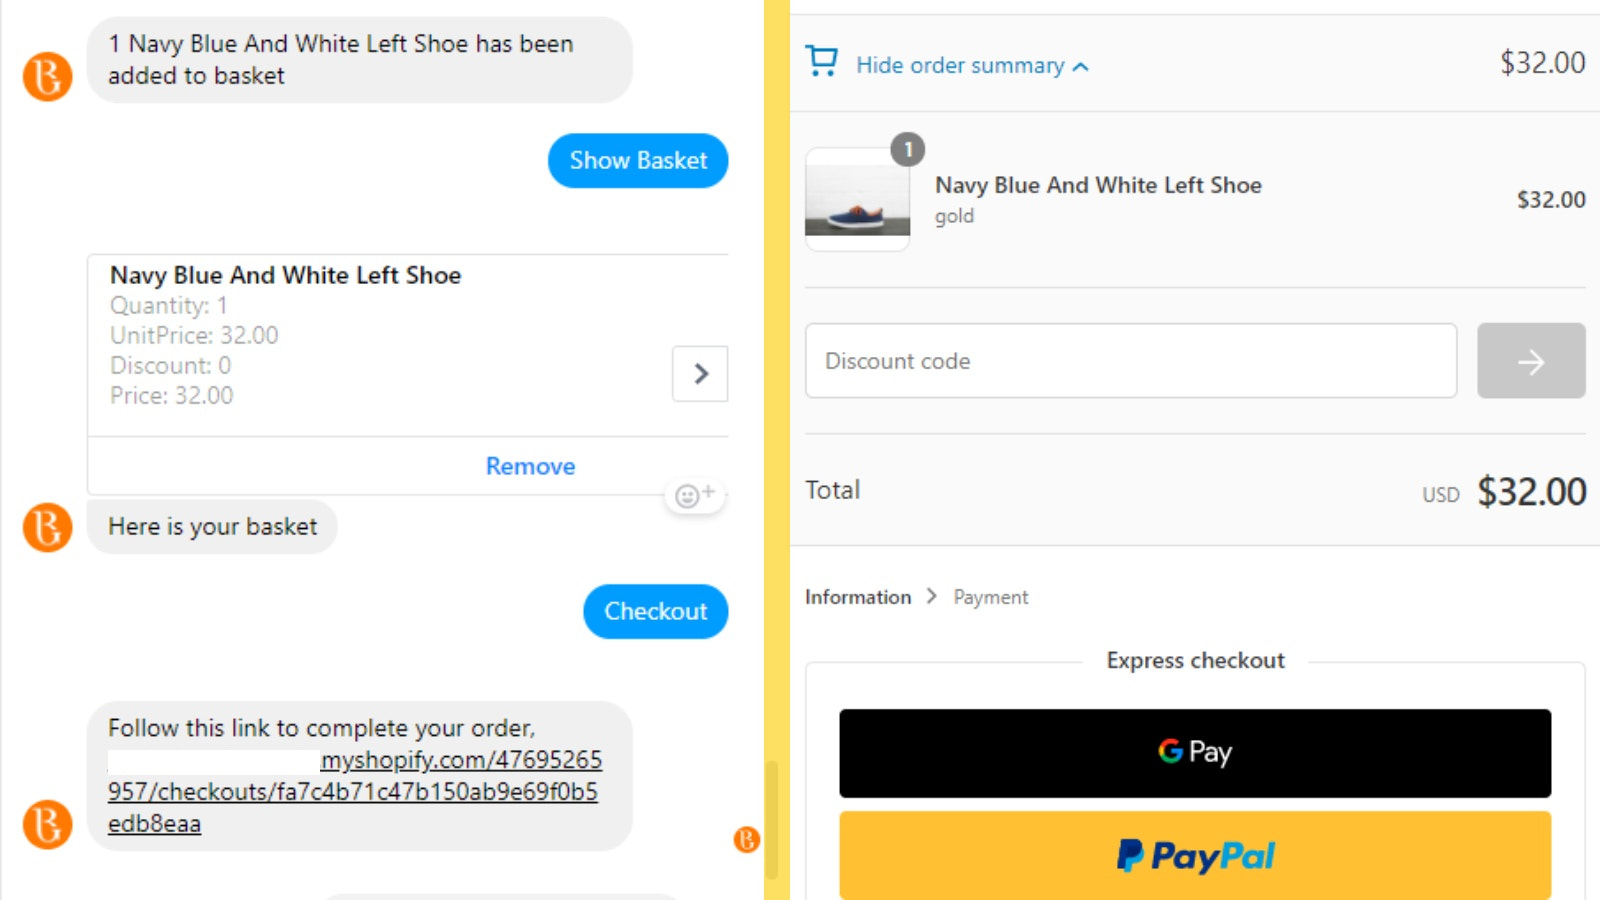 Complete checkout using your shops checkout system!